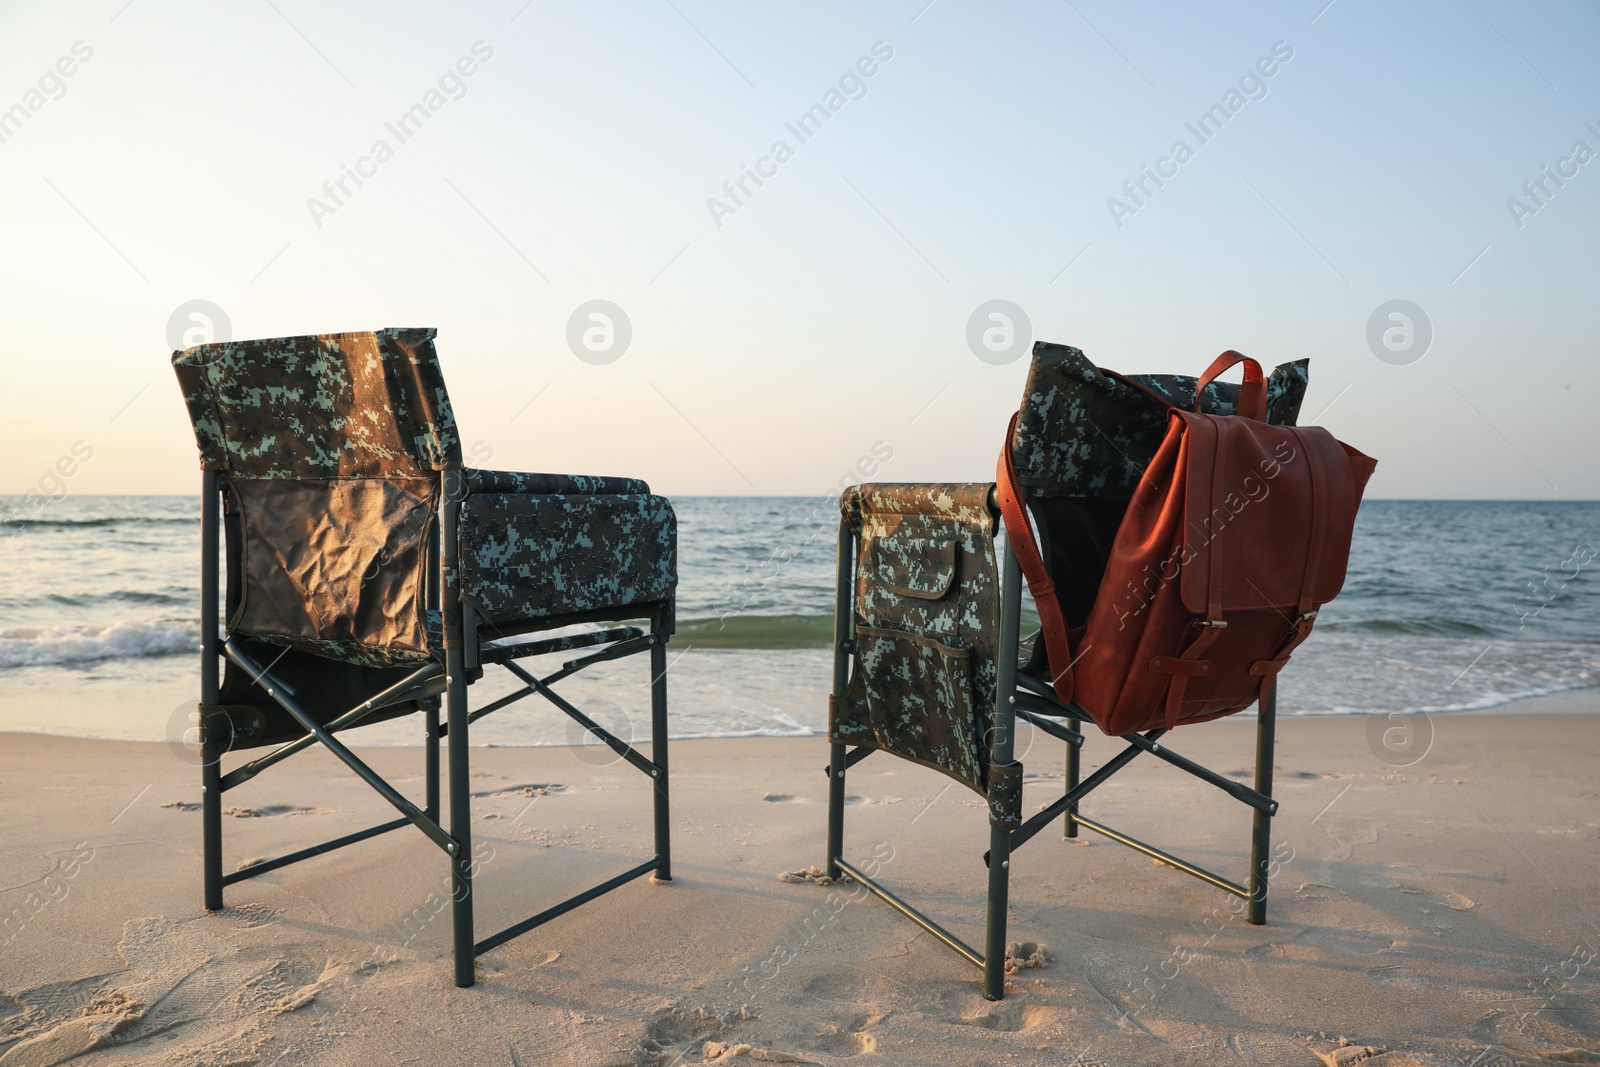 Photo of Camping chairs and backpack on sandy beach near sea